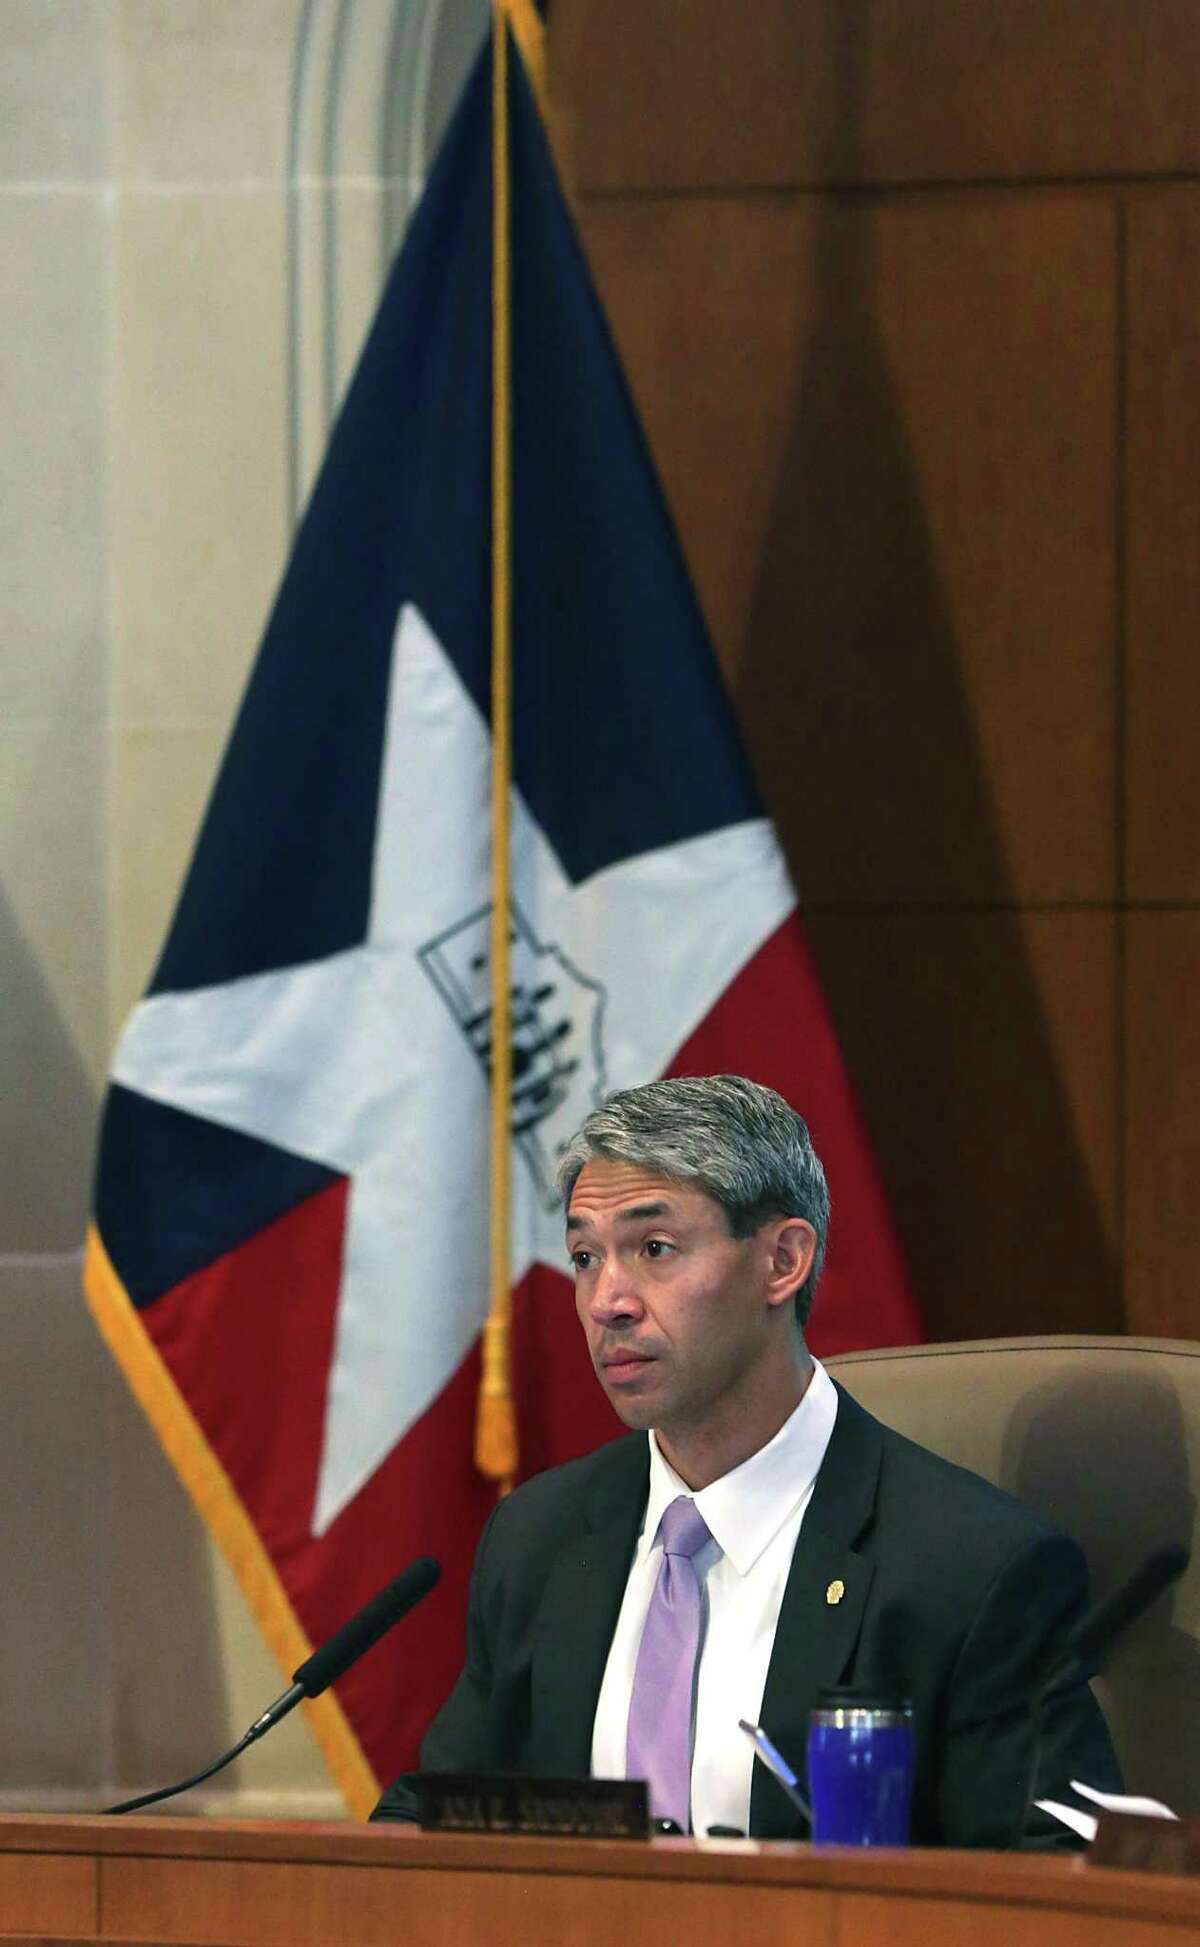 Mayor elect Ron Nirenberg attends his last council meeting as a councilman, in the Municipal Complex on Thursday June 15, 2017.